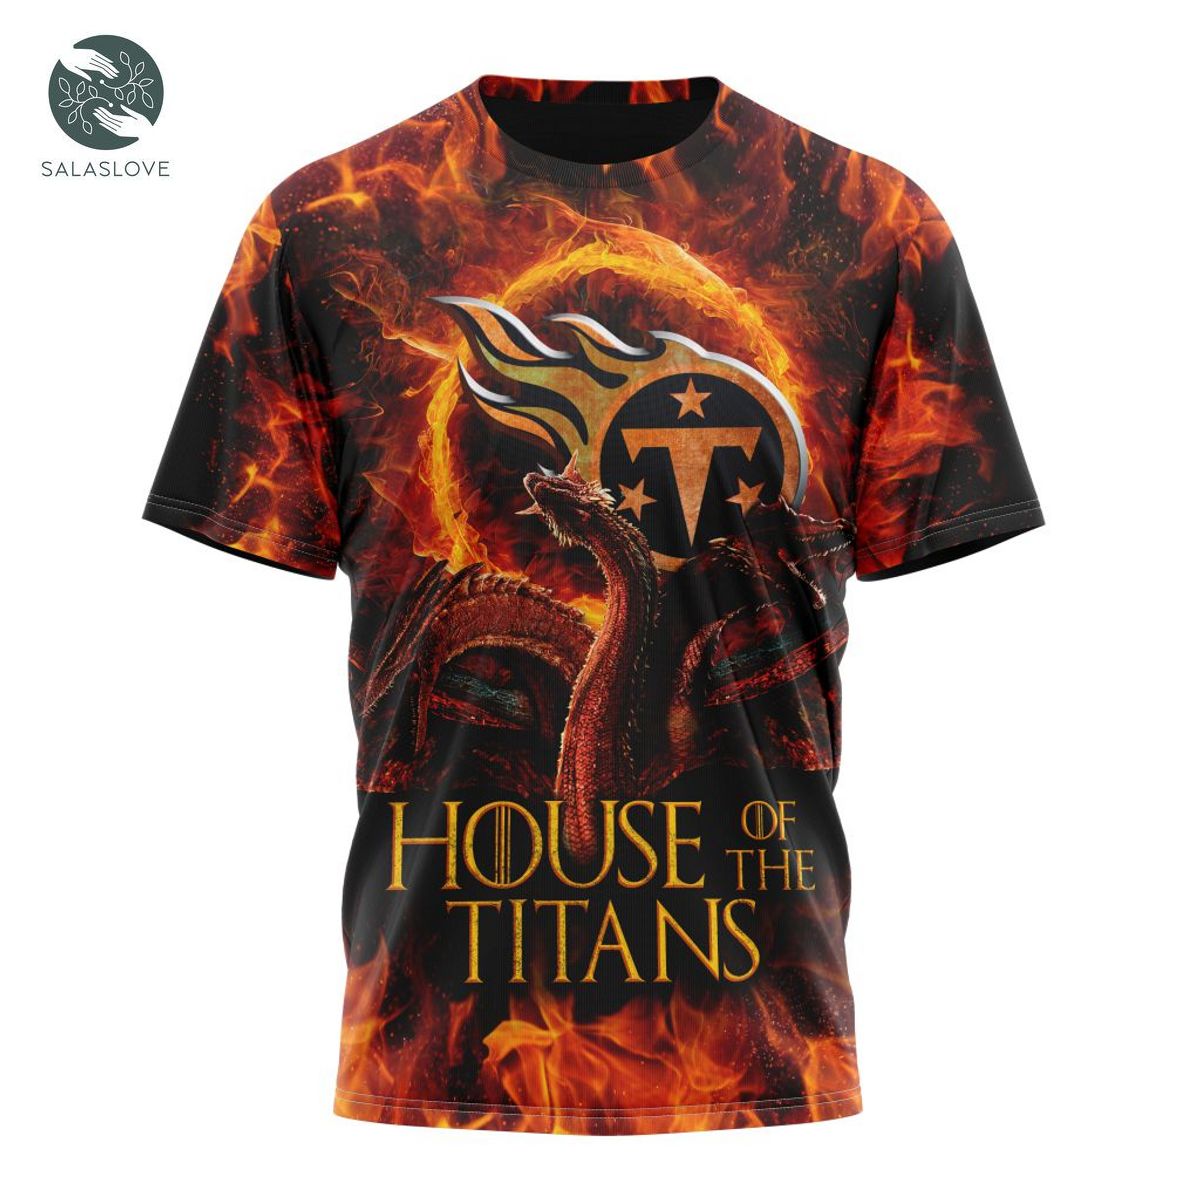 NFL Tennessee Titans GAME OF THRONES – HOUSE OF THE TITANS Shirt